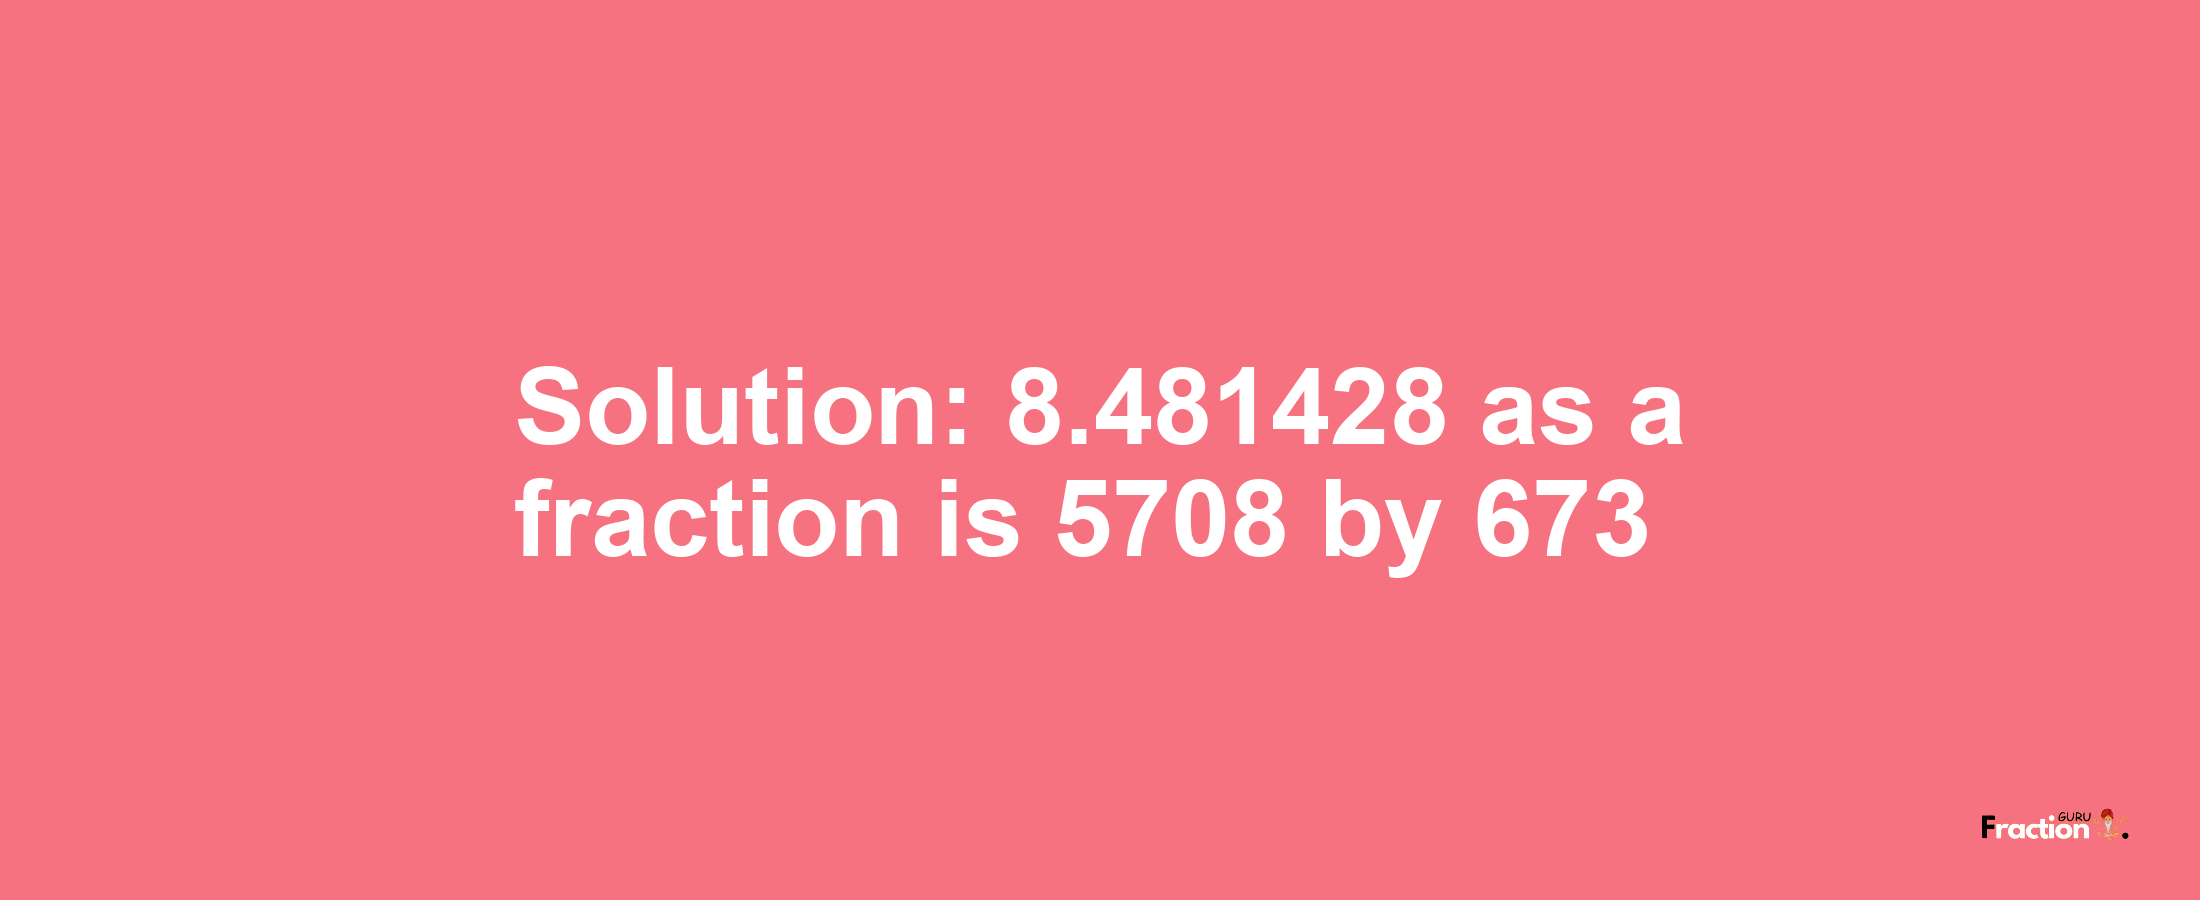 Solution:8.481428 as a fraction is 5708/673